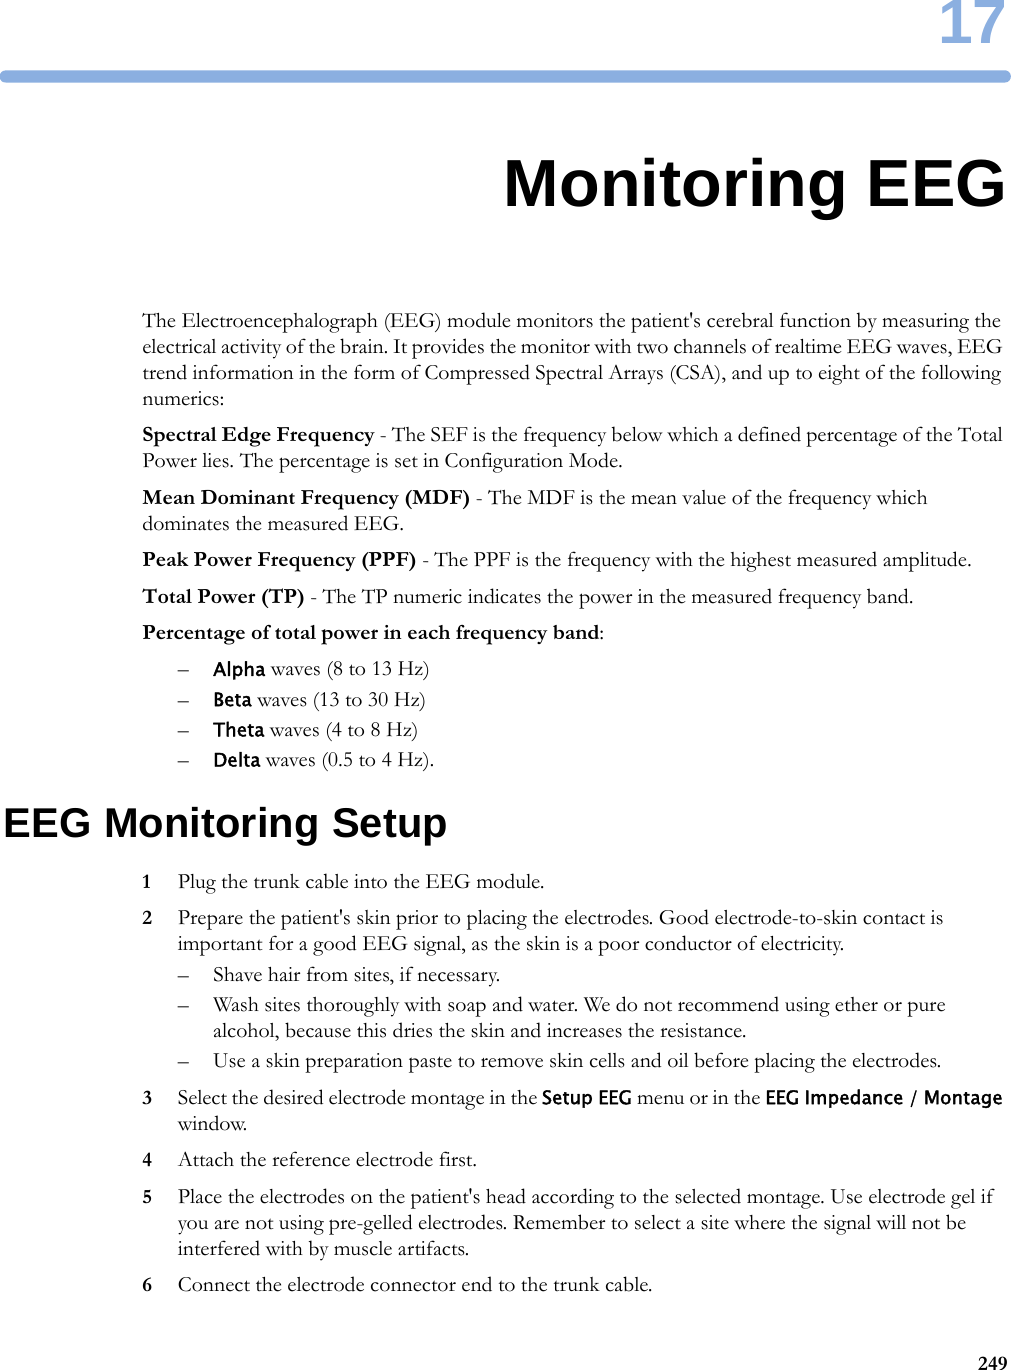 1724917Monitoring EEGThe Electroencephalograph (EEG) module monitors the patient&apos;s cerebral function by measuring the electrical activity of the brain. It provides the monitor with two channels of realtime EEG waves, EEG trend information in the form of Compressed Spectral Arrays (CSA), and up to eight of the following numerics:Spectral Edge Frequency - The SEF is the frequency below which a defined percentage of the Total Power lies. The percentage is set in Configuration Mode.Mean Dominant Frequency (MDF) - The MDF is the mean value of the frequency which dominates the measured EEG.Peak Power Frequency (PPF) - The PPF is the frequency with the highest measured amplitude.Total Power (TP) - The TP numeric indicates the power in the measured frequency band.Percentage of total power in each frequency band:–Alpha waves (8 to 13 Hz)–Beta waves (13 to 30 Hz)–Theta waves (4 to 8 Hz)–Delta waves (0.5 to 4 Hz).EEG Monitoring Setup1Plug the trunk cable into the EEG module.2Prepare the patient&apos;s skin prior to placing the electrodes. Good electrode-to-skin contact is important for a good EEG signal, as the skin is a poor conductor of electricity.– Shave hair from sites, if necessary.– Wash sites thoroughly with soap and water. We do not recommend using ether or pure alcohol, because this dries the skin and increases the resistance.– Use a skin preparation paste to remove skin cells and oil before placing the electrodes.3Select the desired electrode montage in the Setup EEG menu or in the EEG Impedance / Montage window.4Attach the reference electrode first.5Place the electrodes on the patient&apos;s head according to the selected montage. Use electrode gel if you are not using pre-gelled electrodes. Remember to select a site where the signal will not be interfered with by muscle artifacts.6Connect the electrode connector end to the trunk cable.